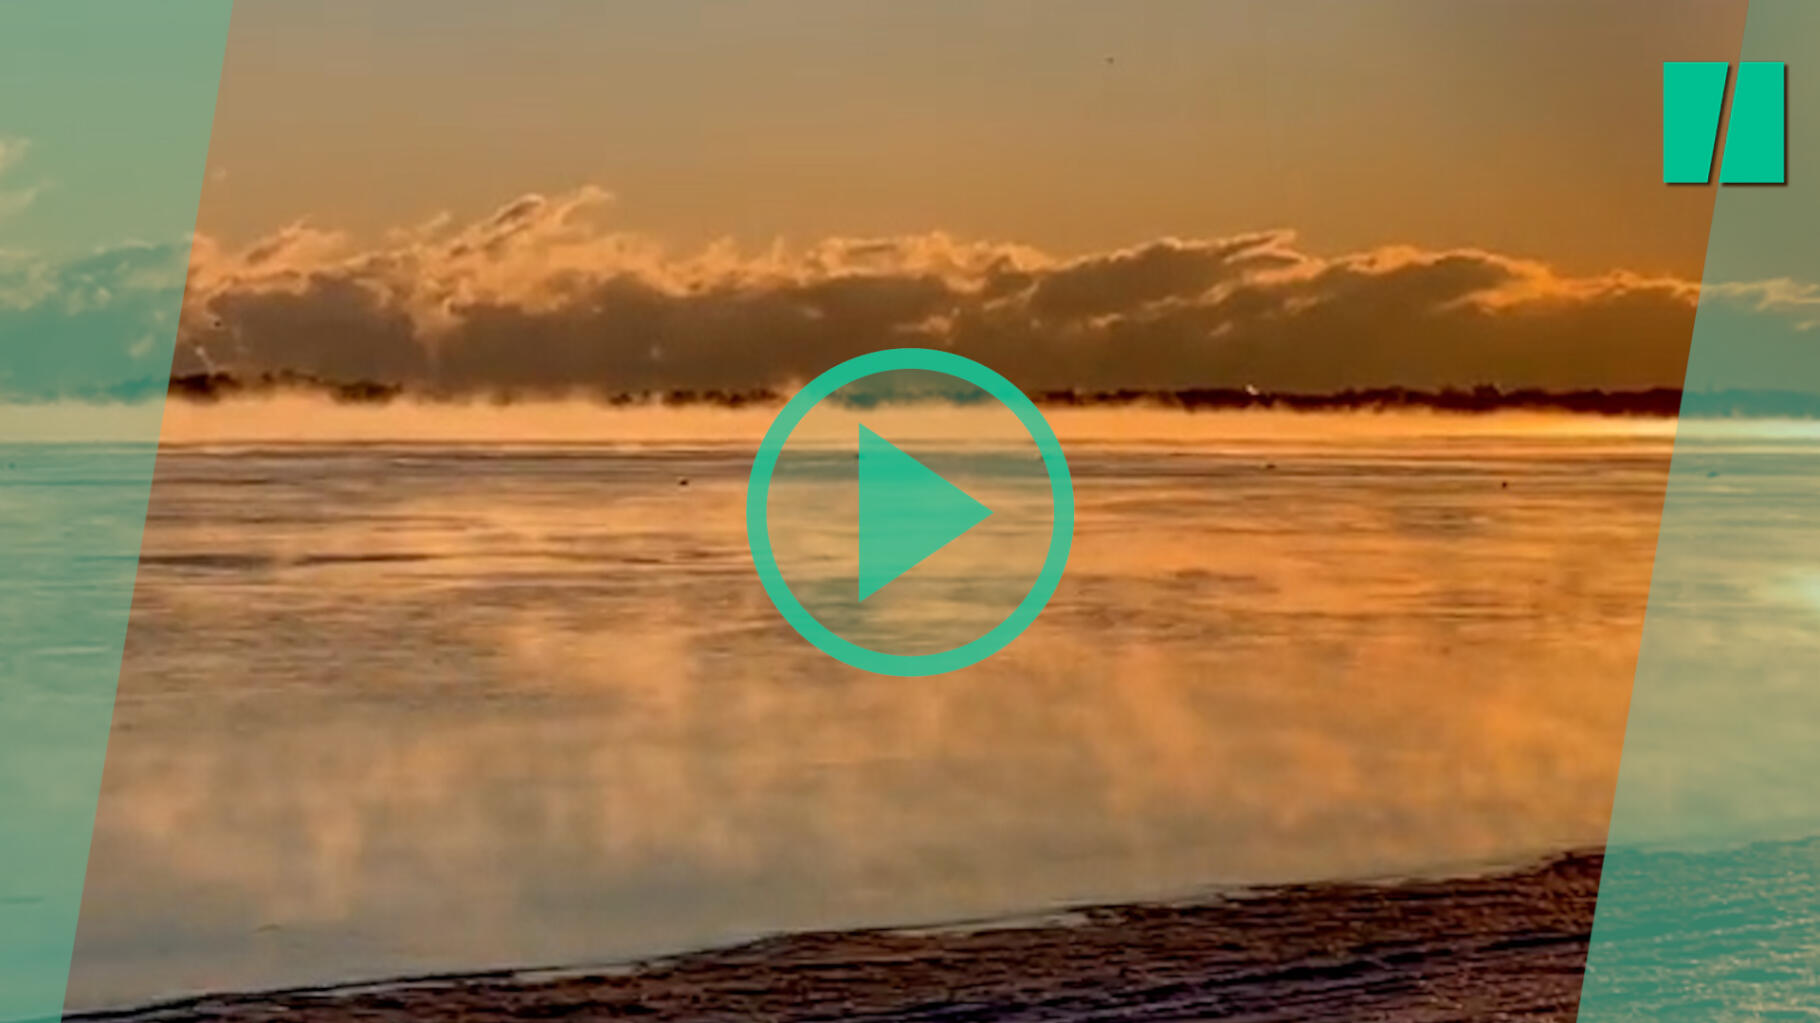 In the US and Canada, the spectacular images of “Sea Smoke”